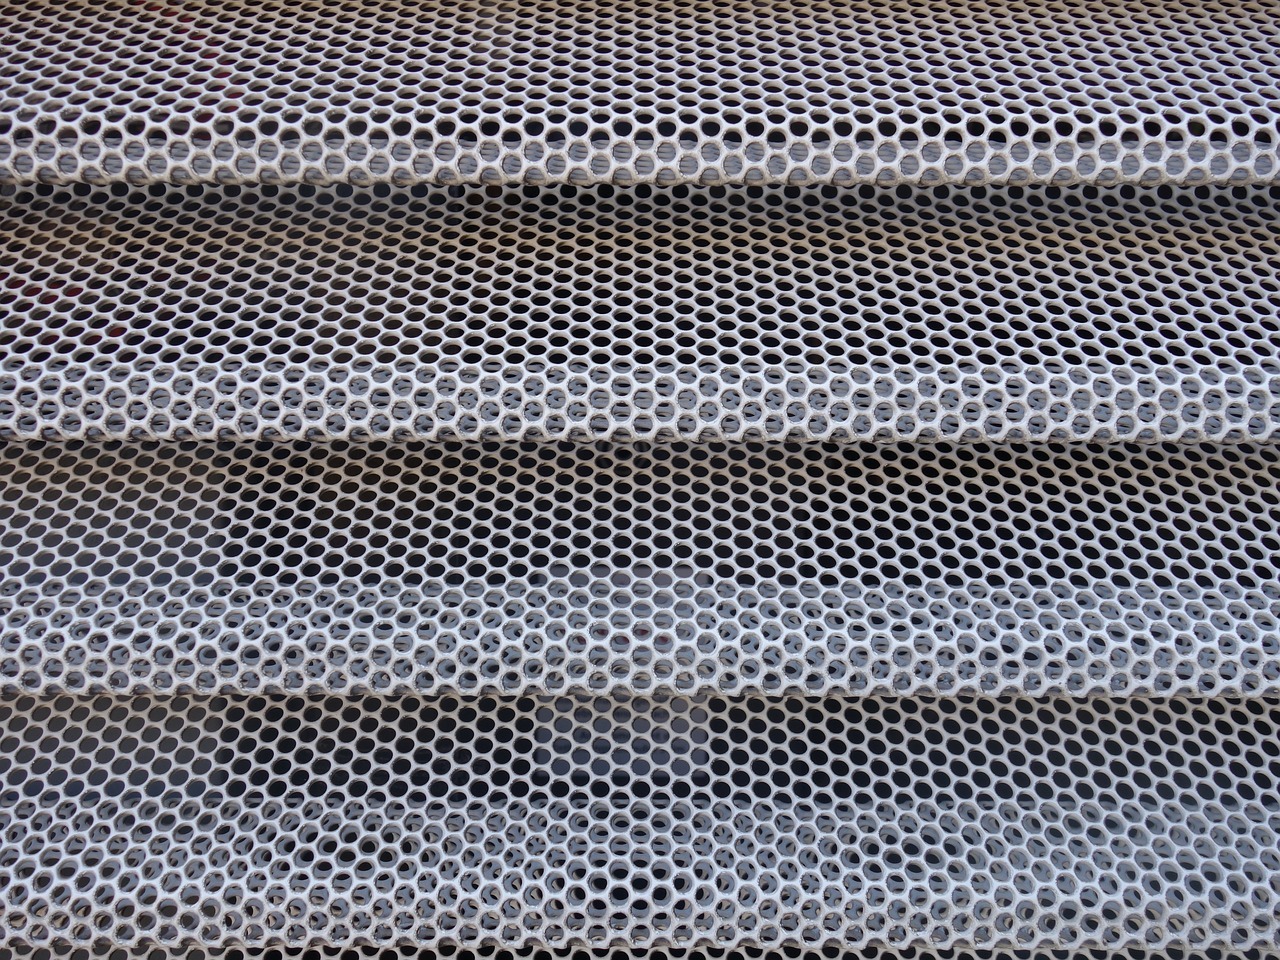 5 Uses of Perforated Metal in Construction and Home Building